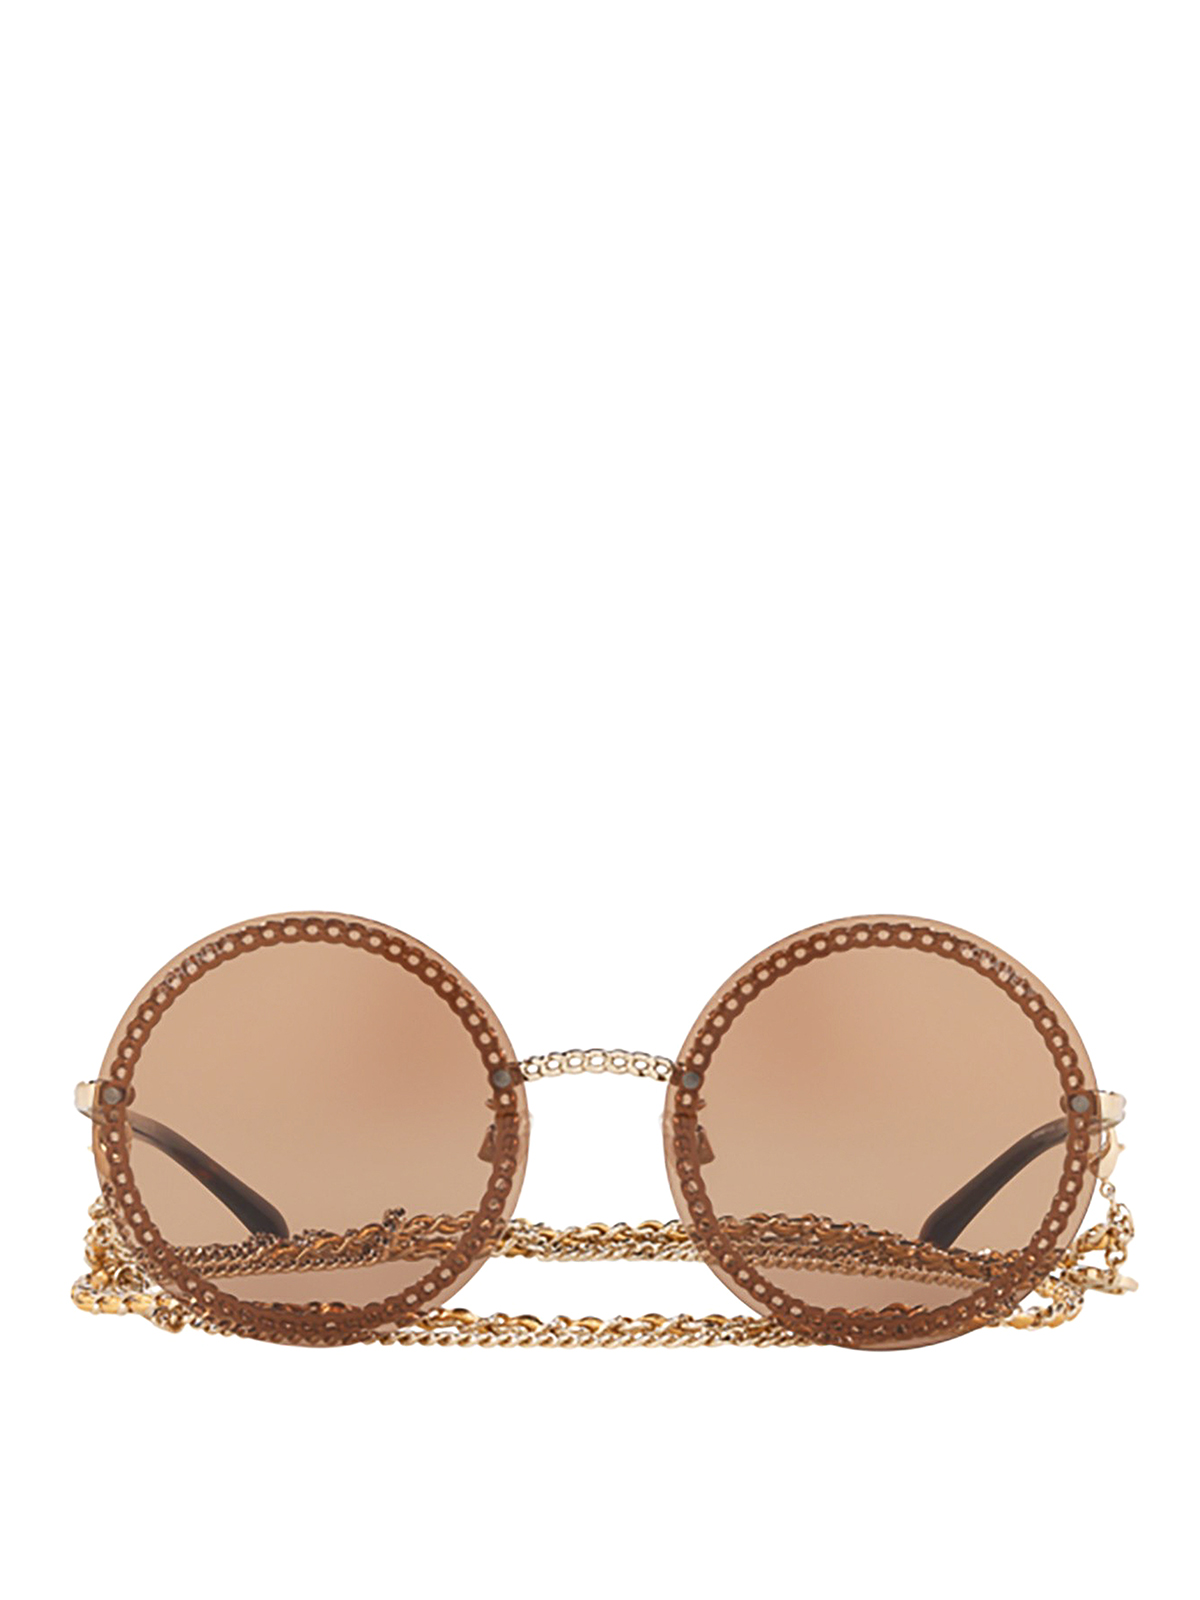 Sunglasses Chanel - Chain embellished brown round sunglasses - CH4245C3953